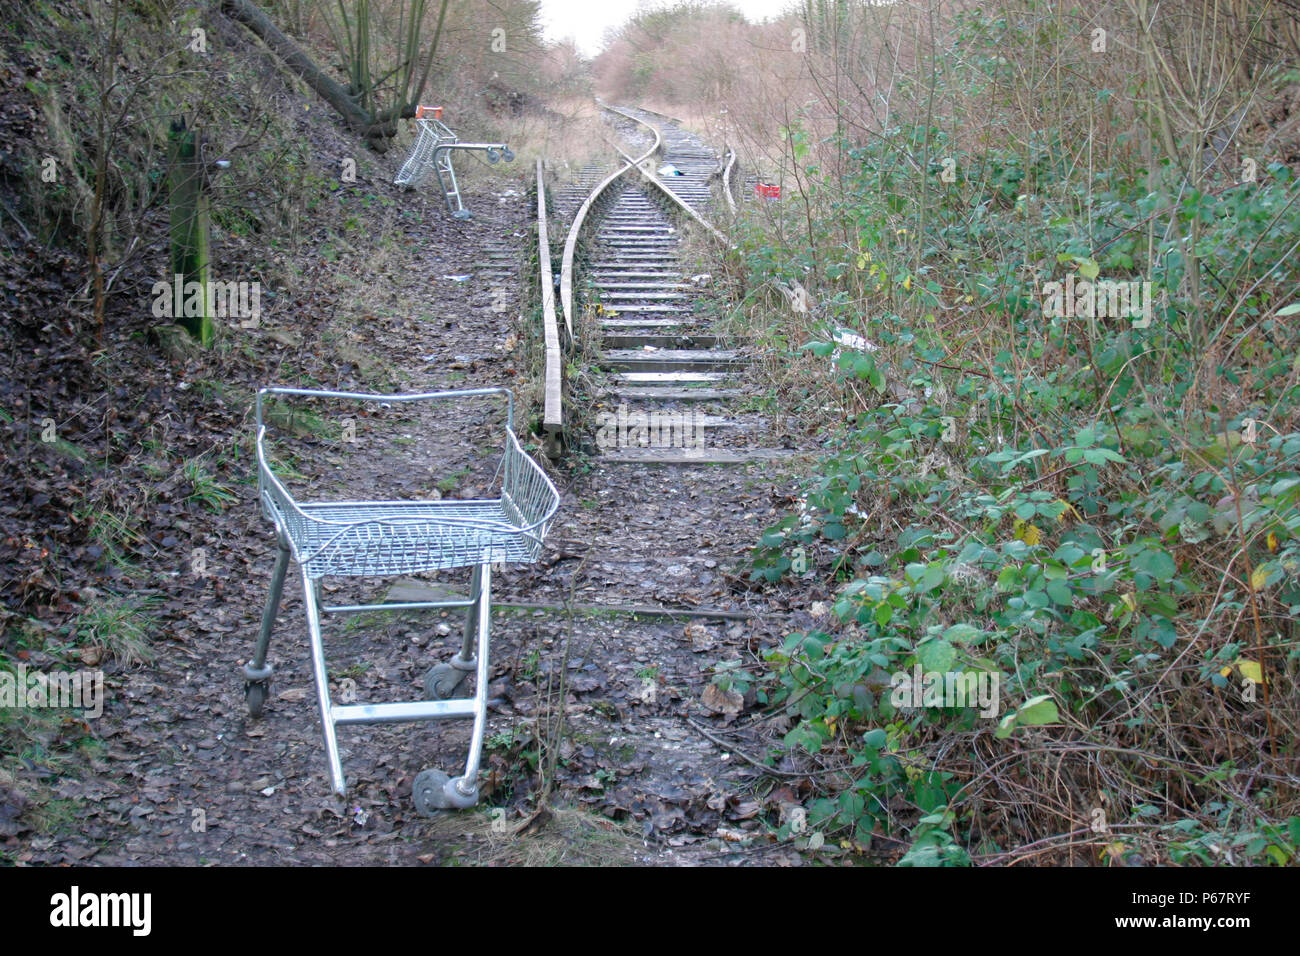 Overgrown and derelict - the disused Luton to Dunstable branch line at Dunstable. January 2004. Stock Photo